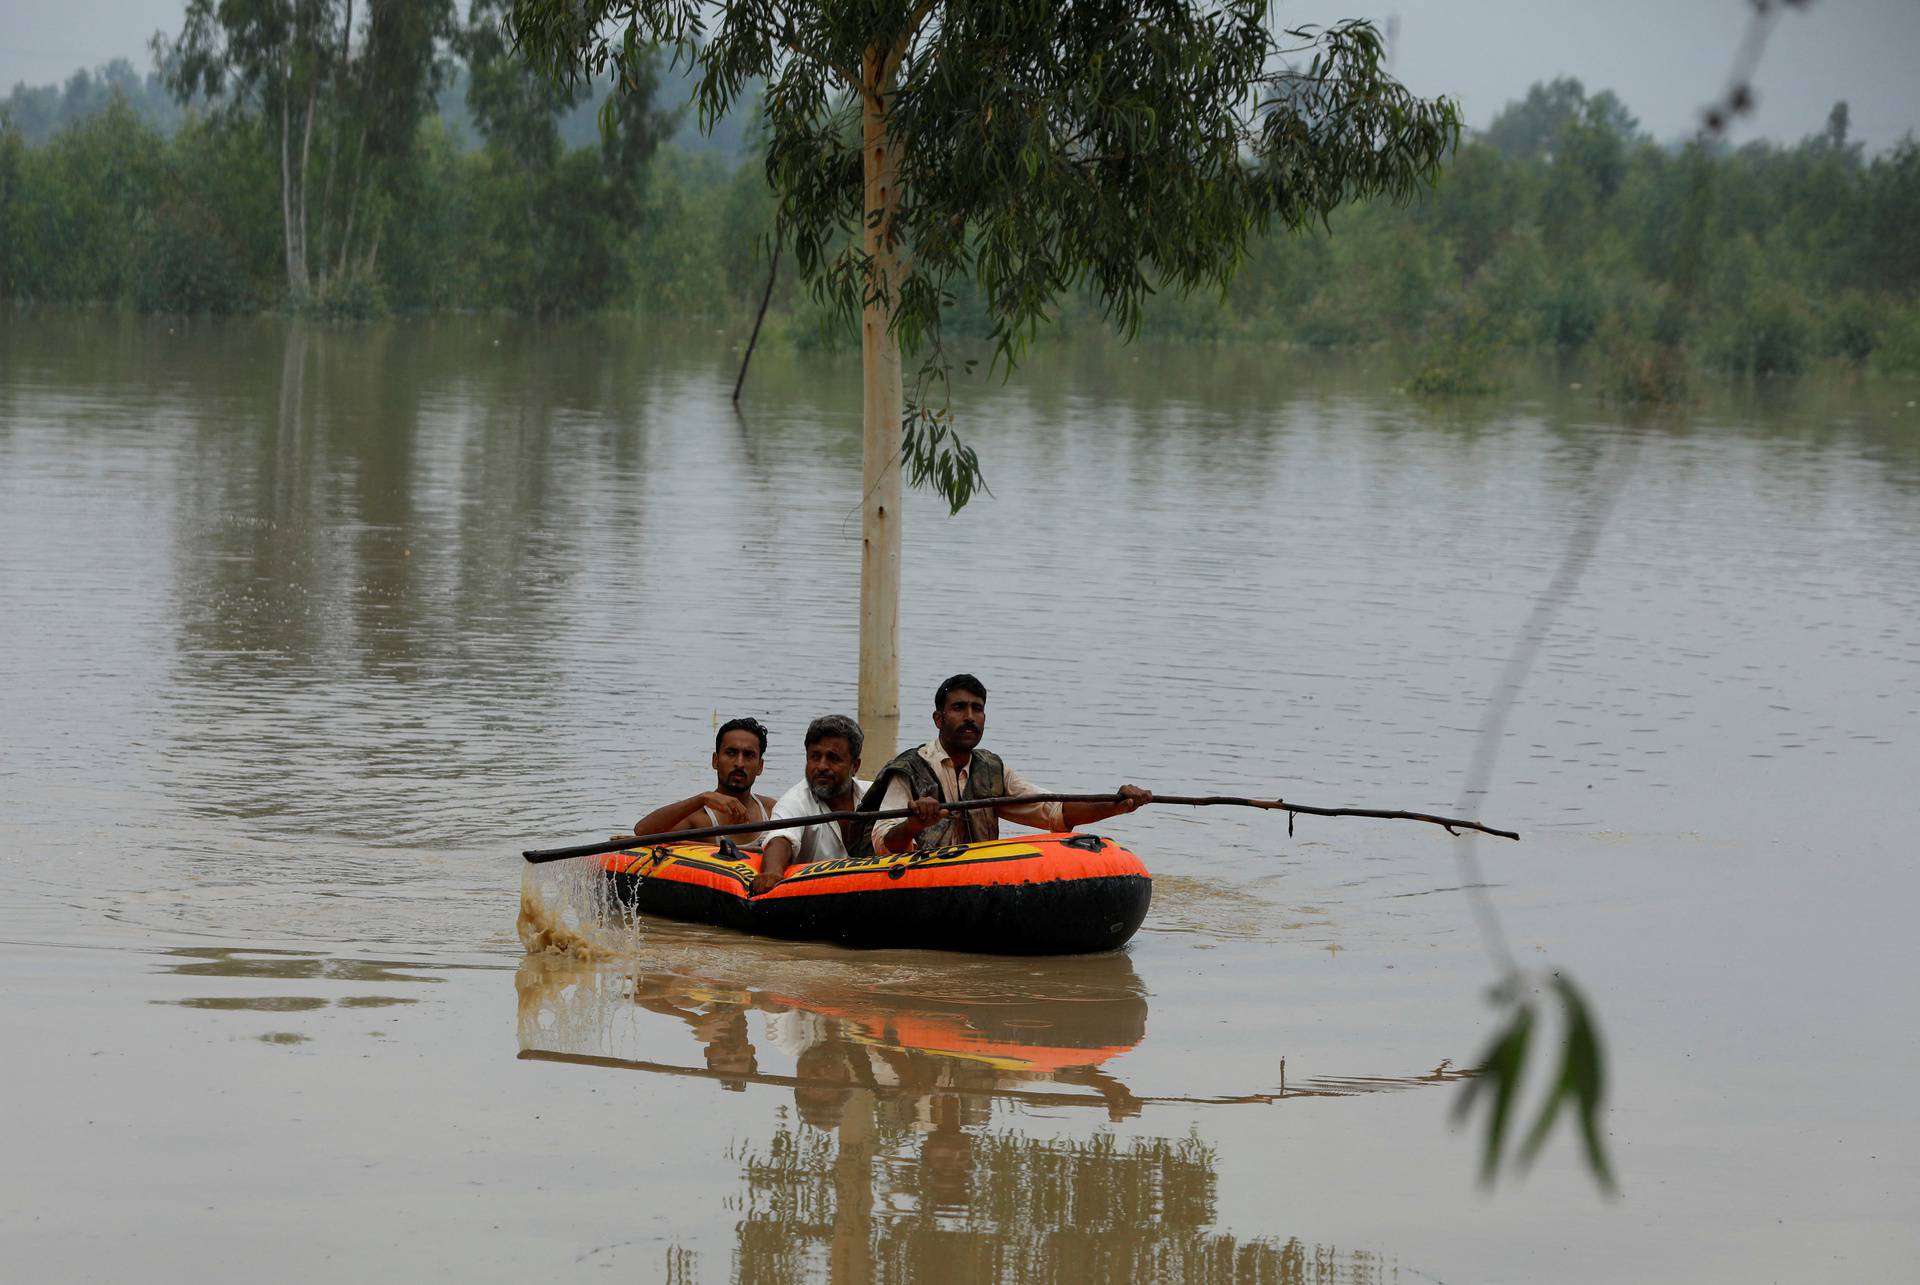 A volunteer rows an inflatable boat as he evacuates flood victims, following rains and floods during the monsoon season in Charsadda